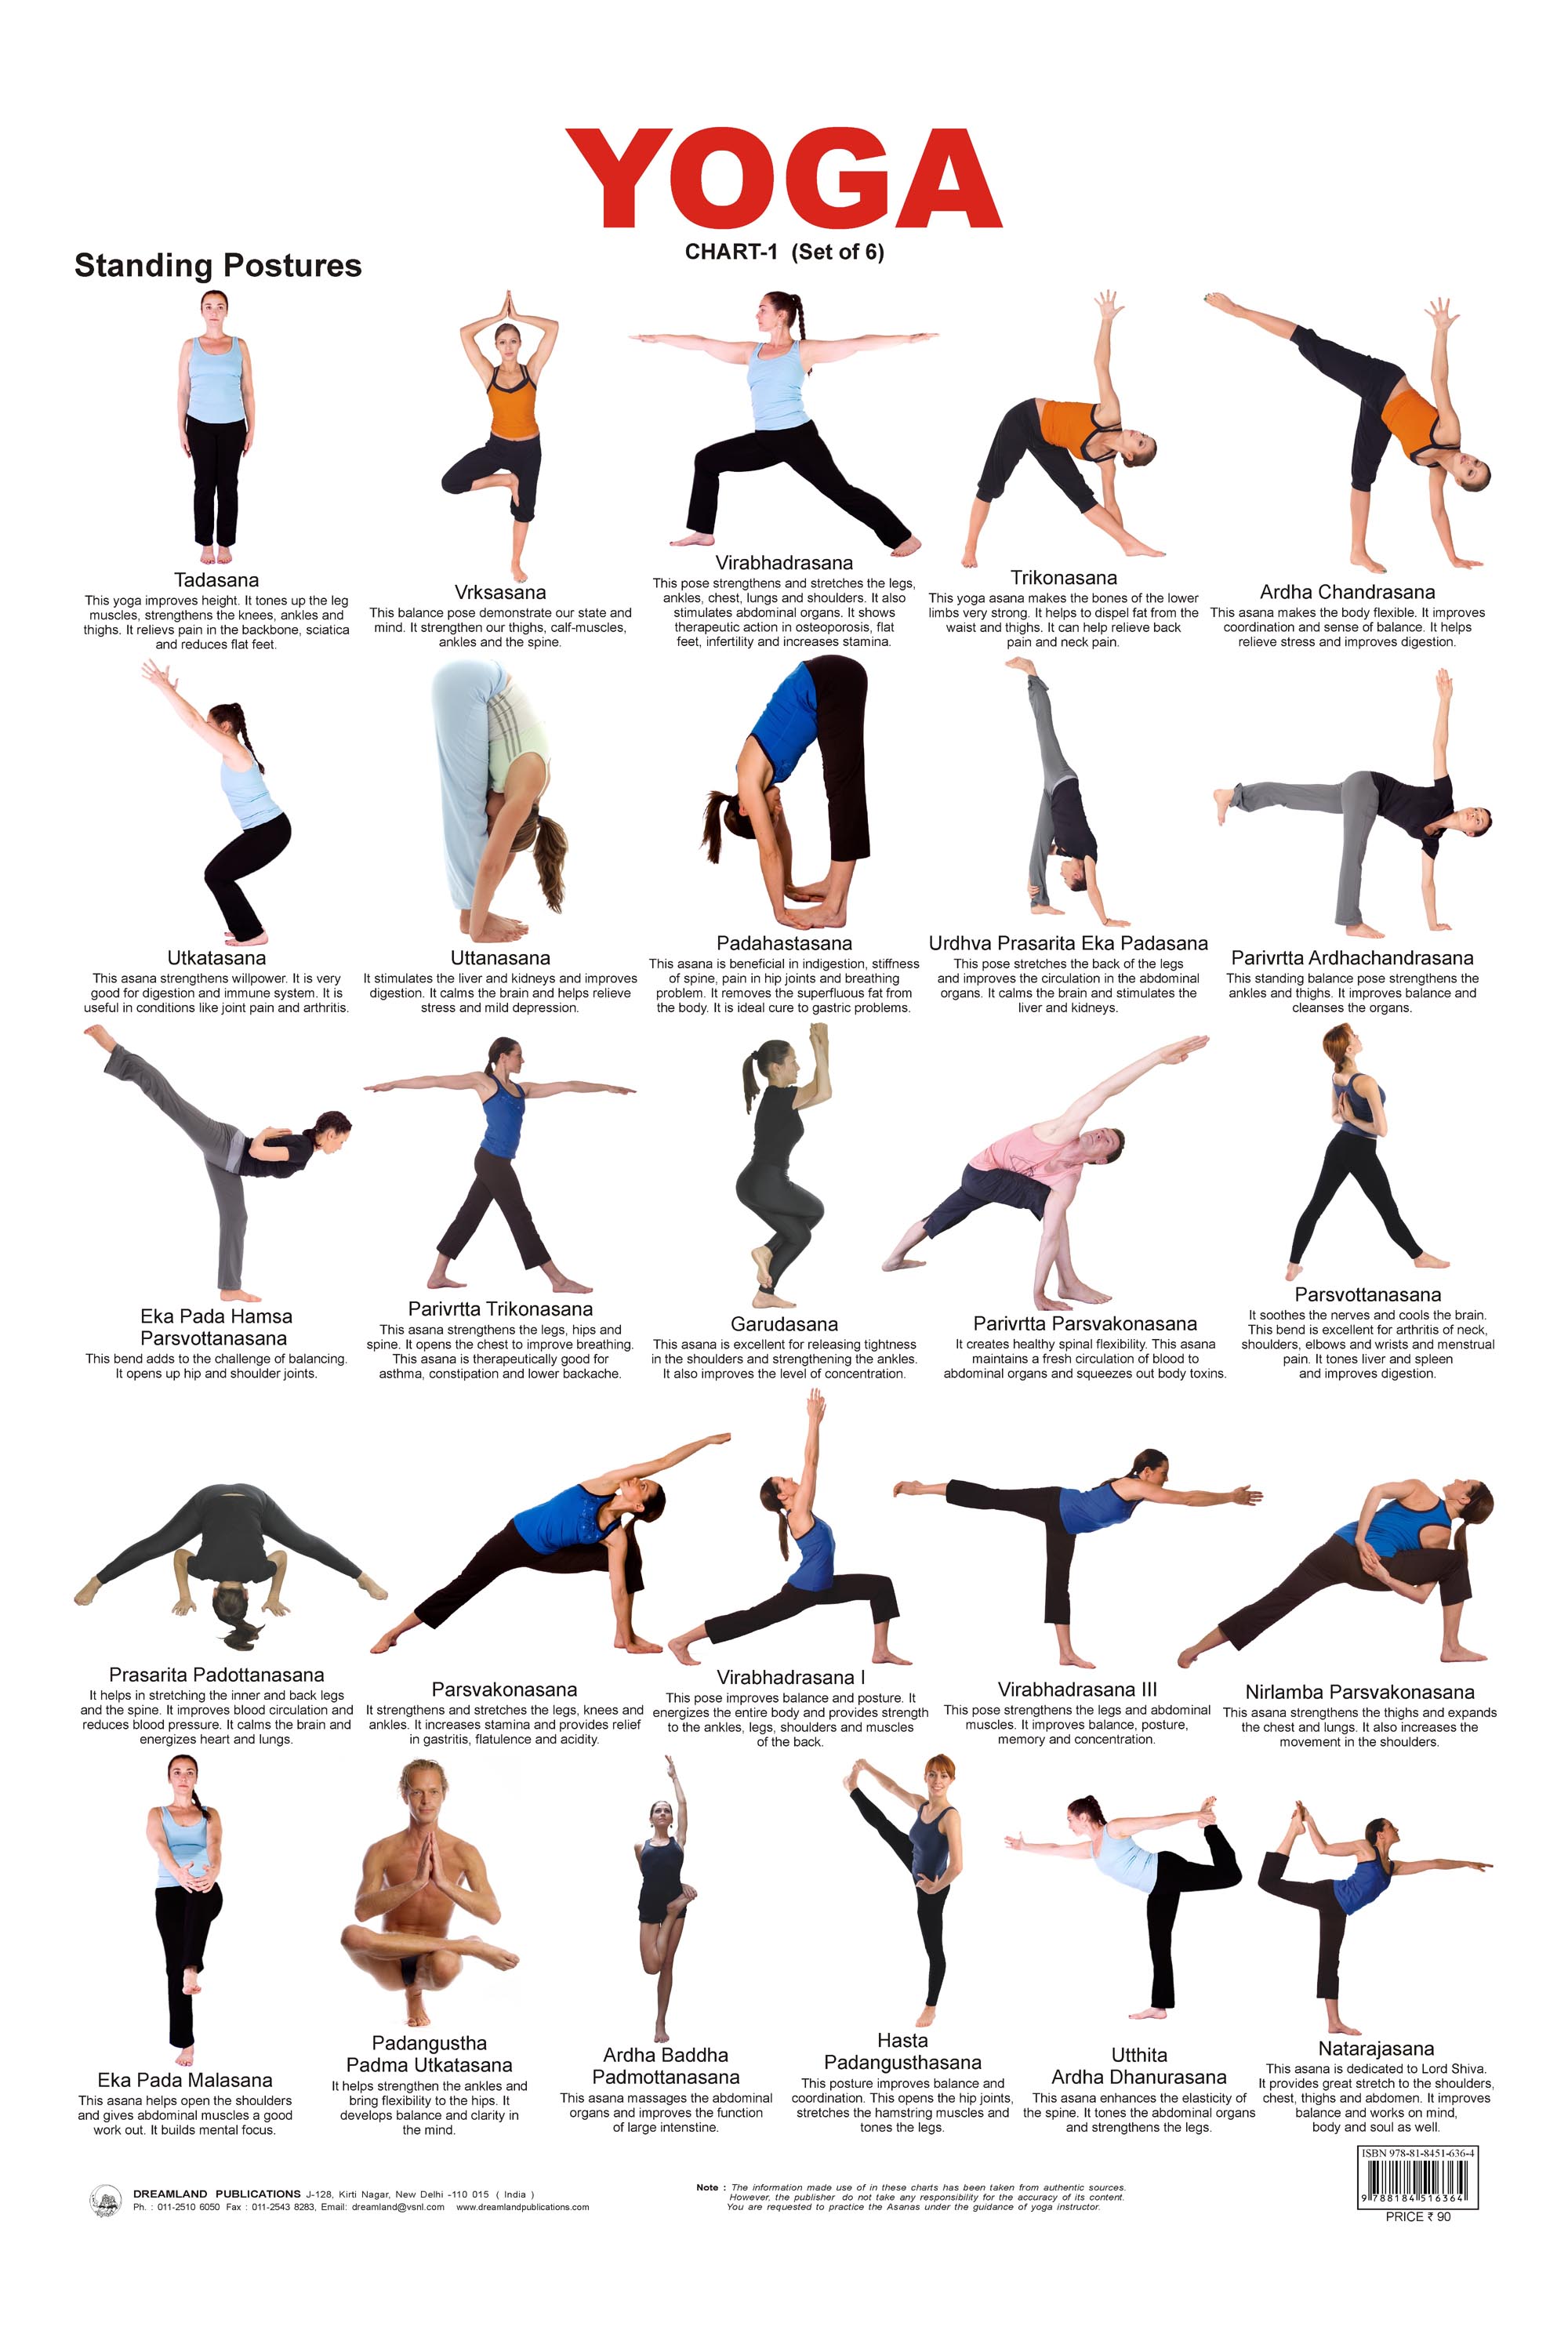 poses hundred poses  are Yoga  many yoga exercises of There different a Yoga. over  schools